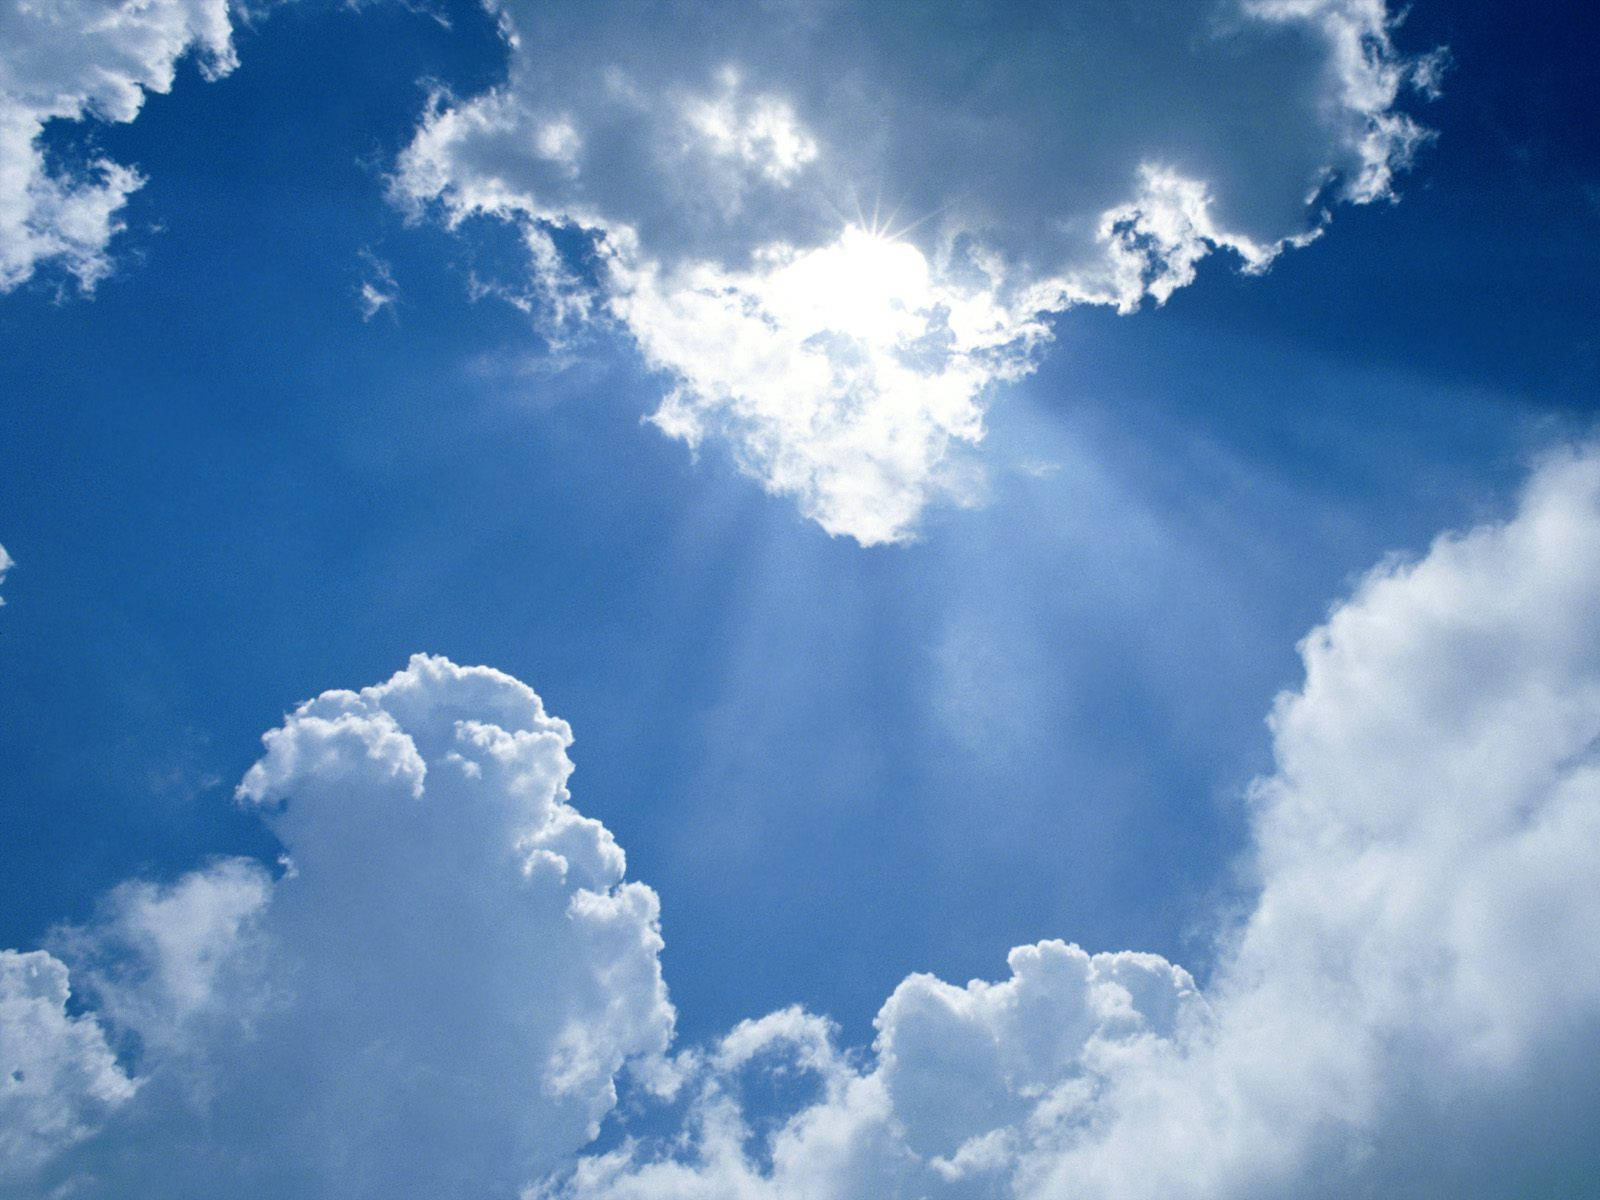 A Blue Sky With Clouds And Sun Shining Through Background